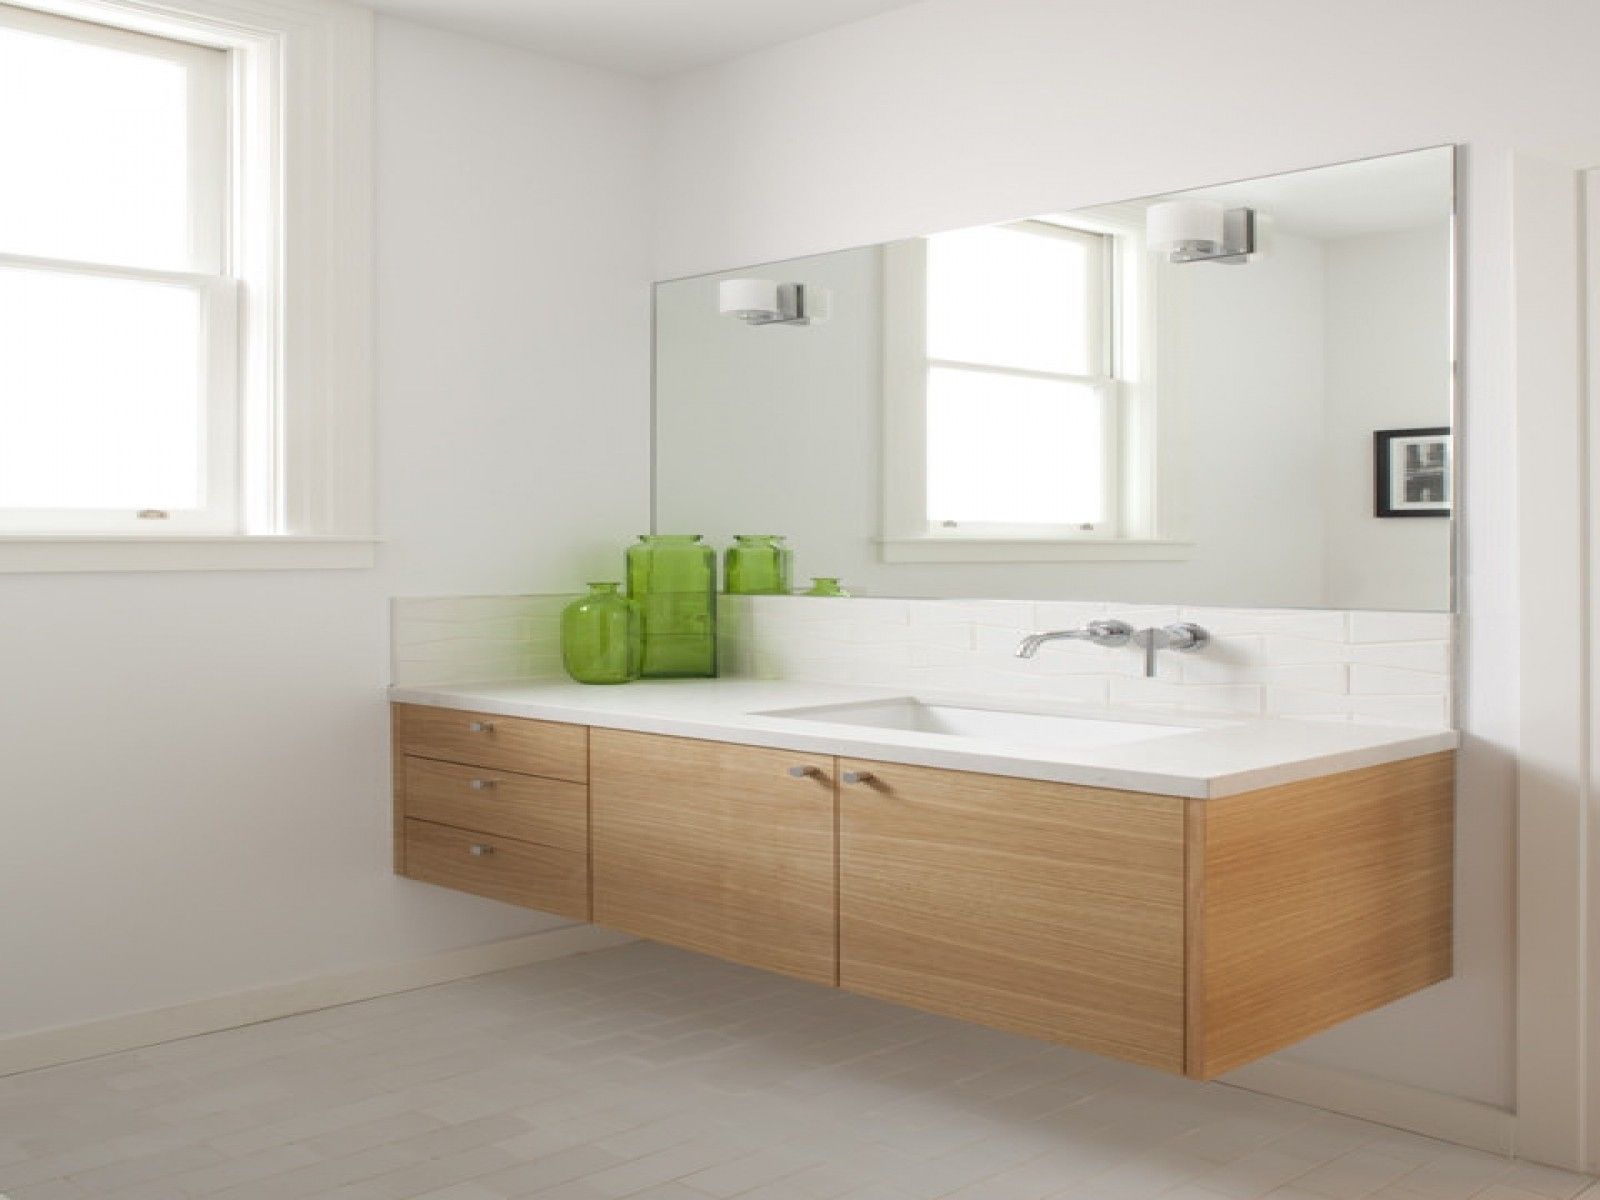 Floating Light Brown Wooden Vanity With White Counter Top And Sink Throughout Long Brown Mirror (View 13 of 15)